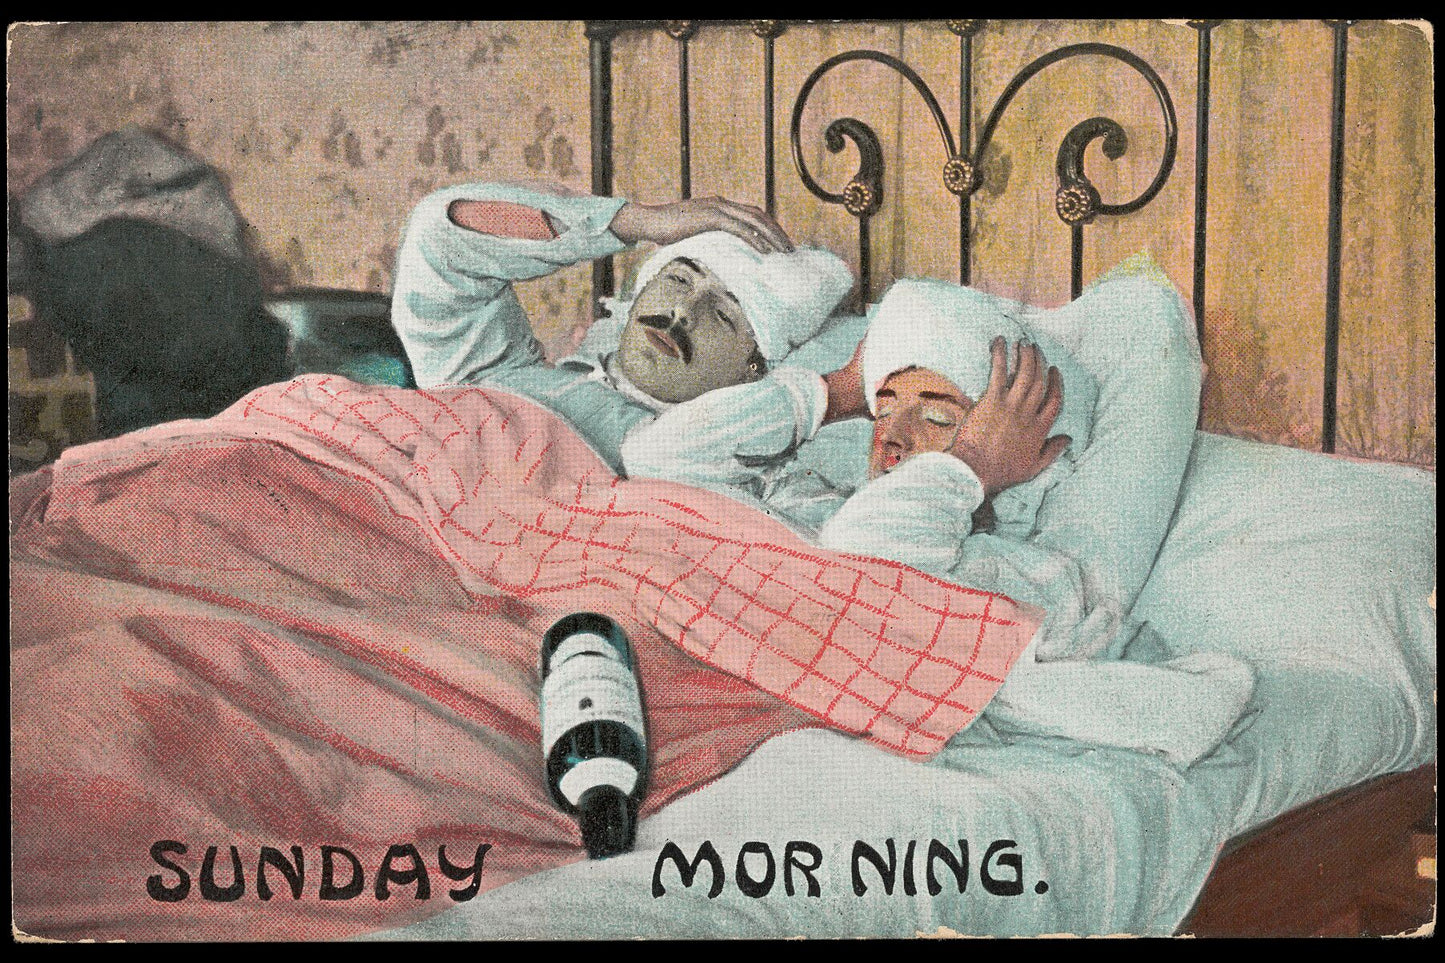 Two men in bed on a Sunday Morning after drinking from a bottle of alcohol. Colour process print, ca. 1908 postcard